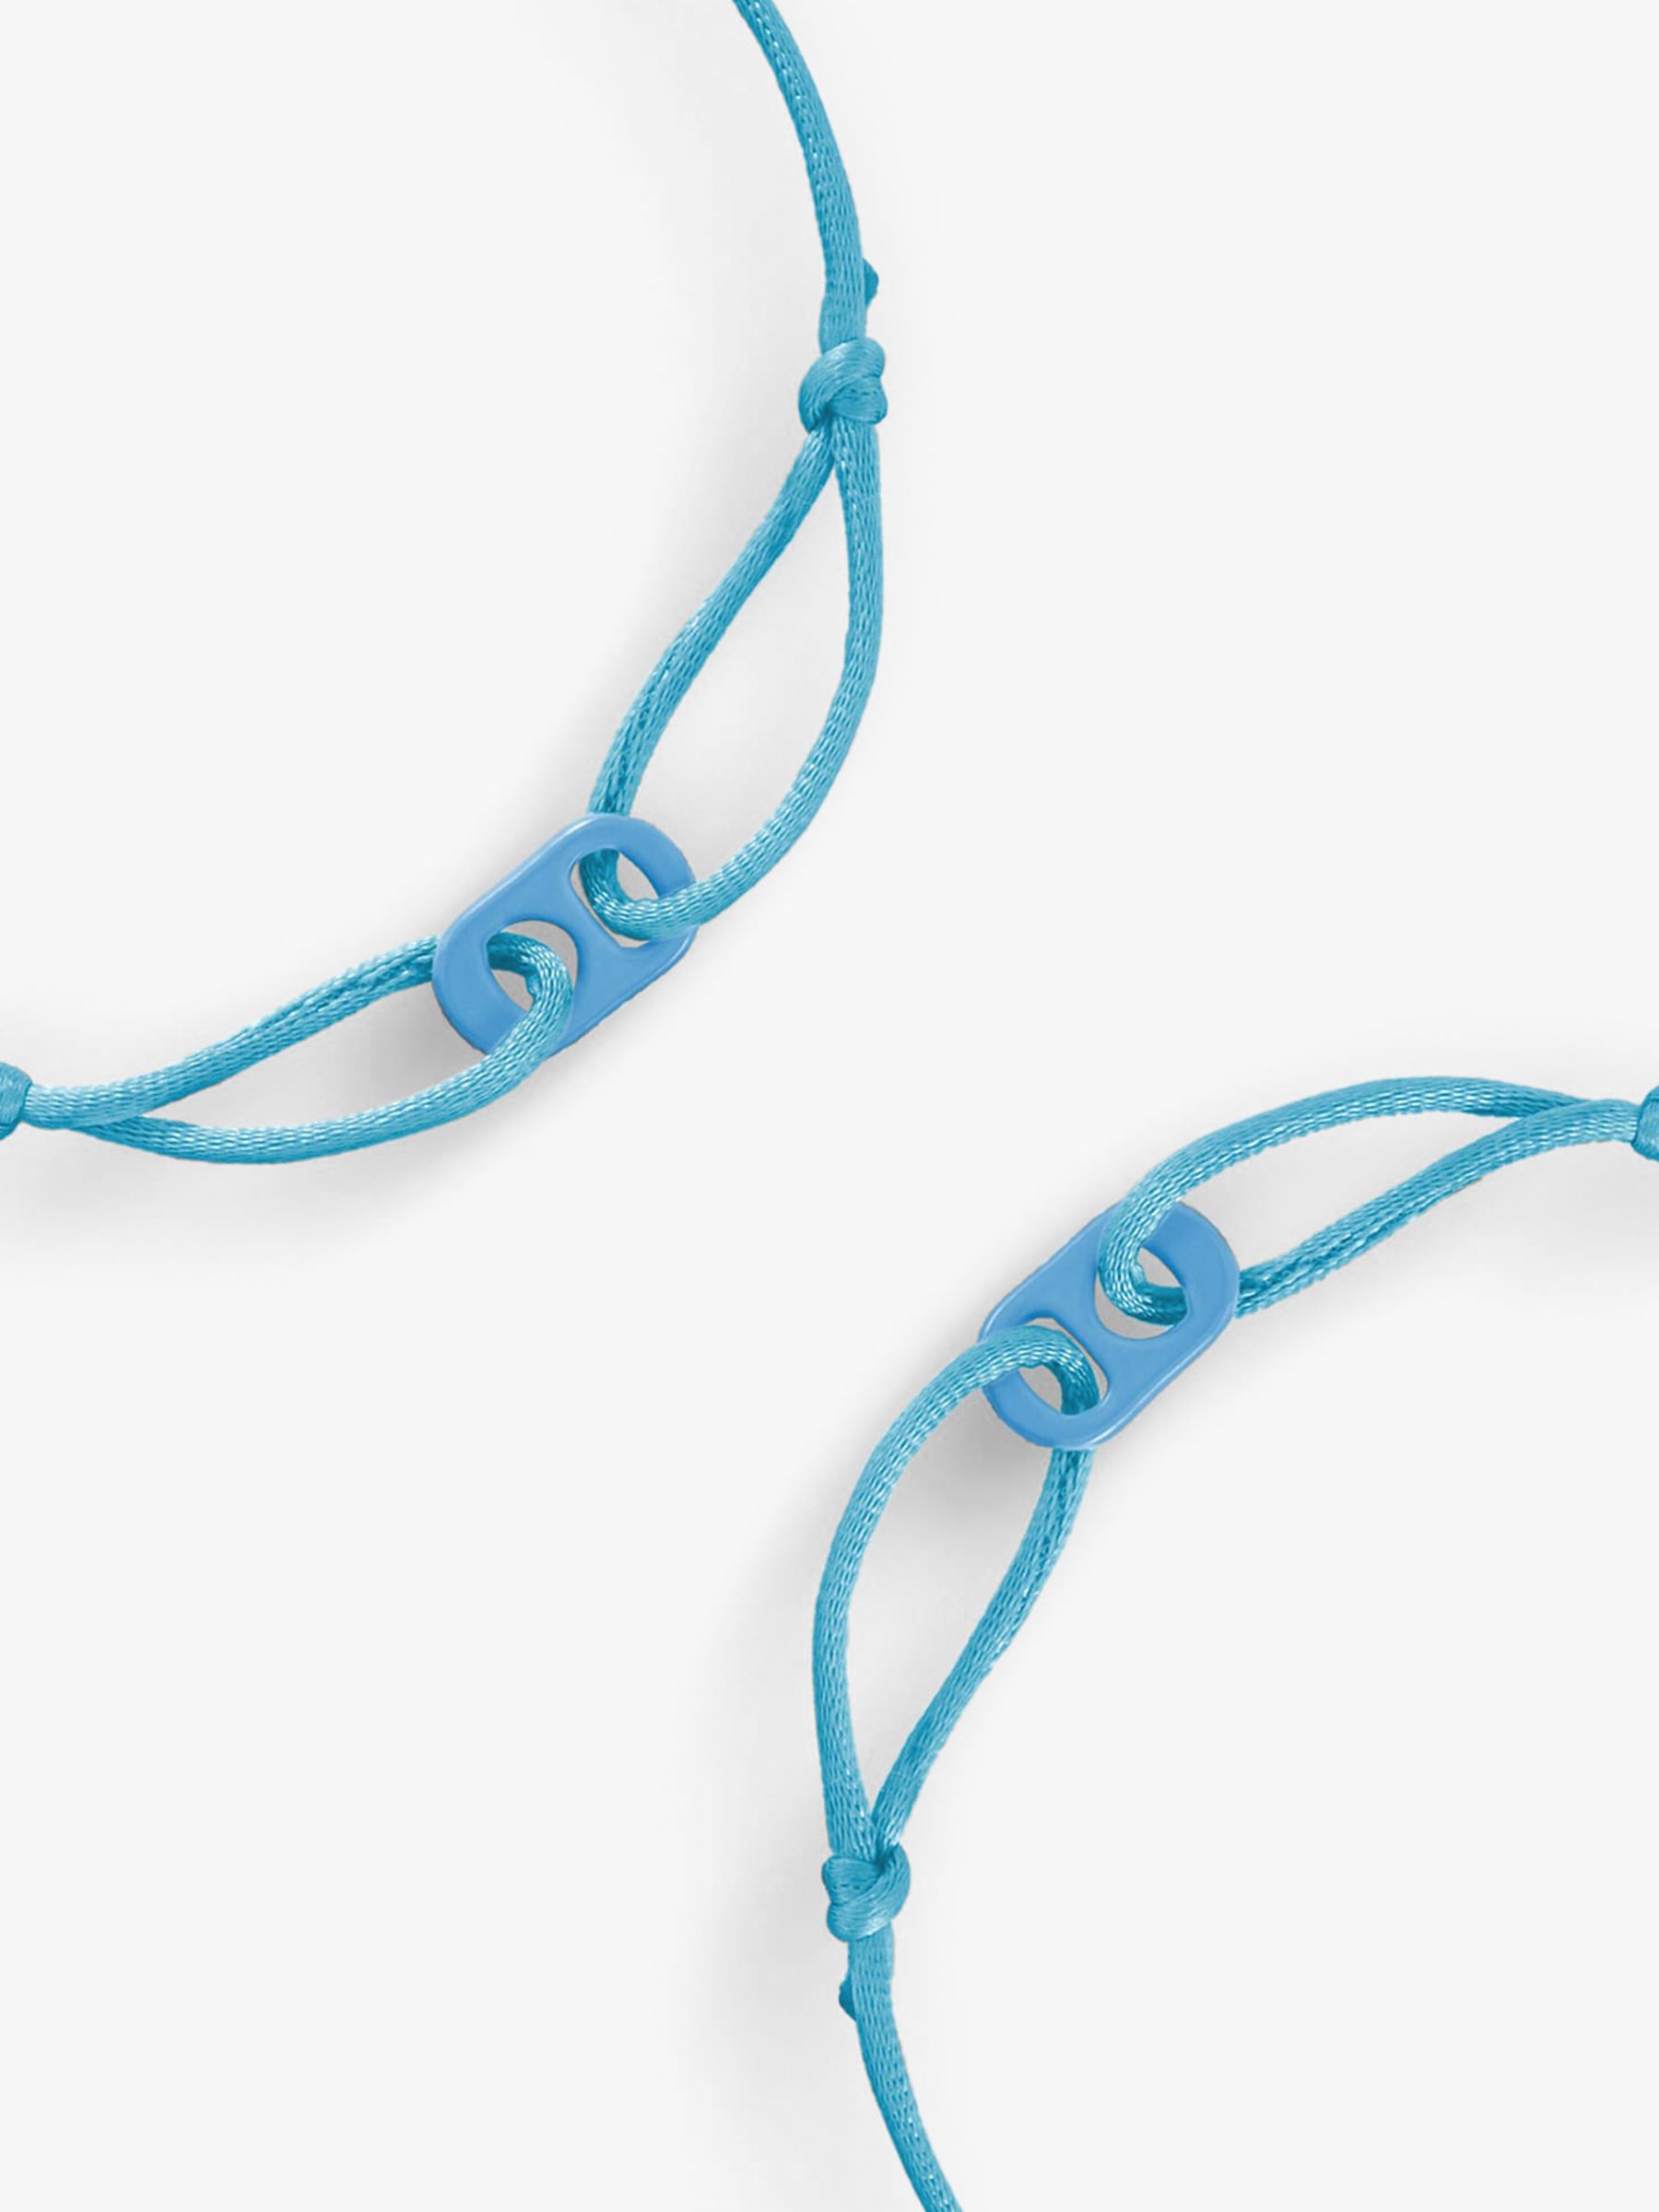 #TOGETHERBAND UN Goal 6 - Clean Water and Sanitation Recycled Plastic Mini Bracelet, Pack of 2, Bright Blue